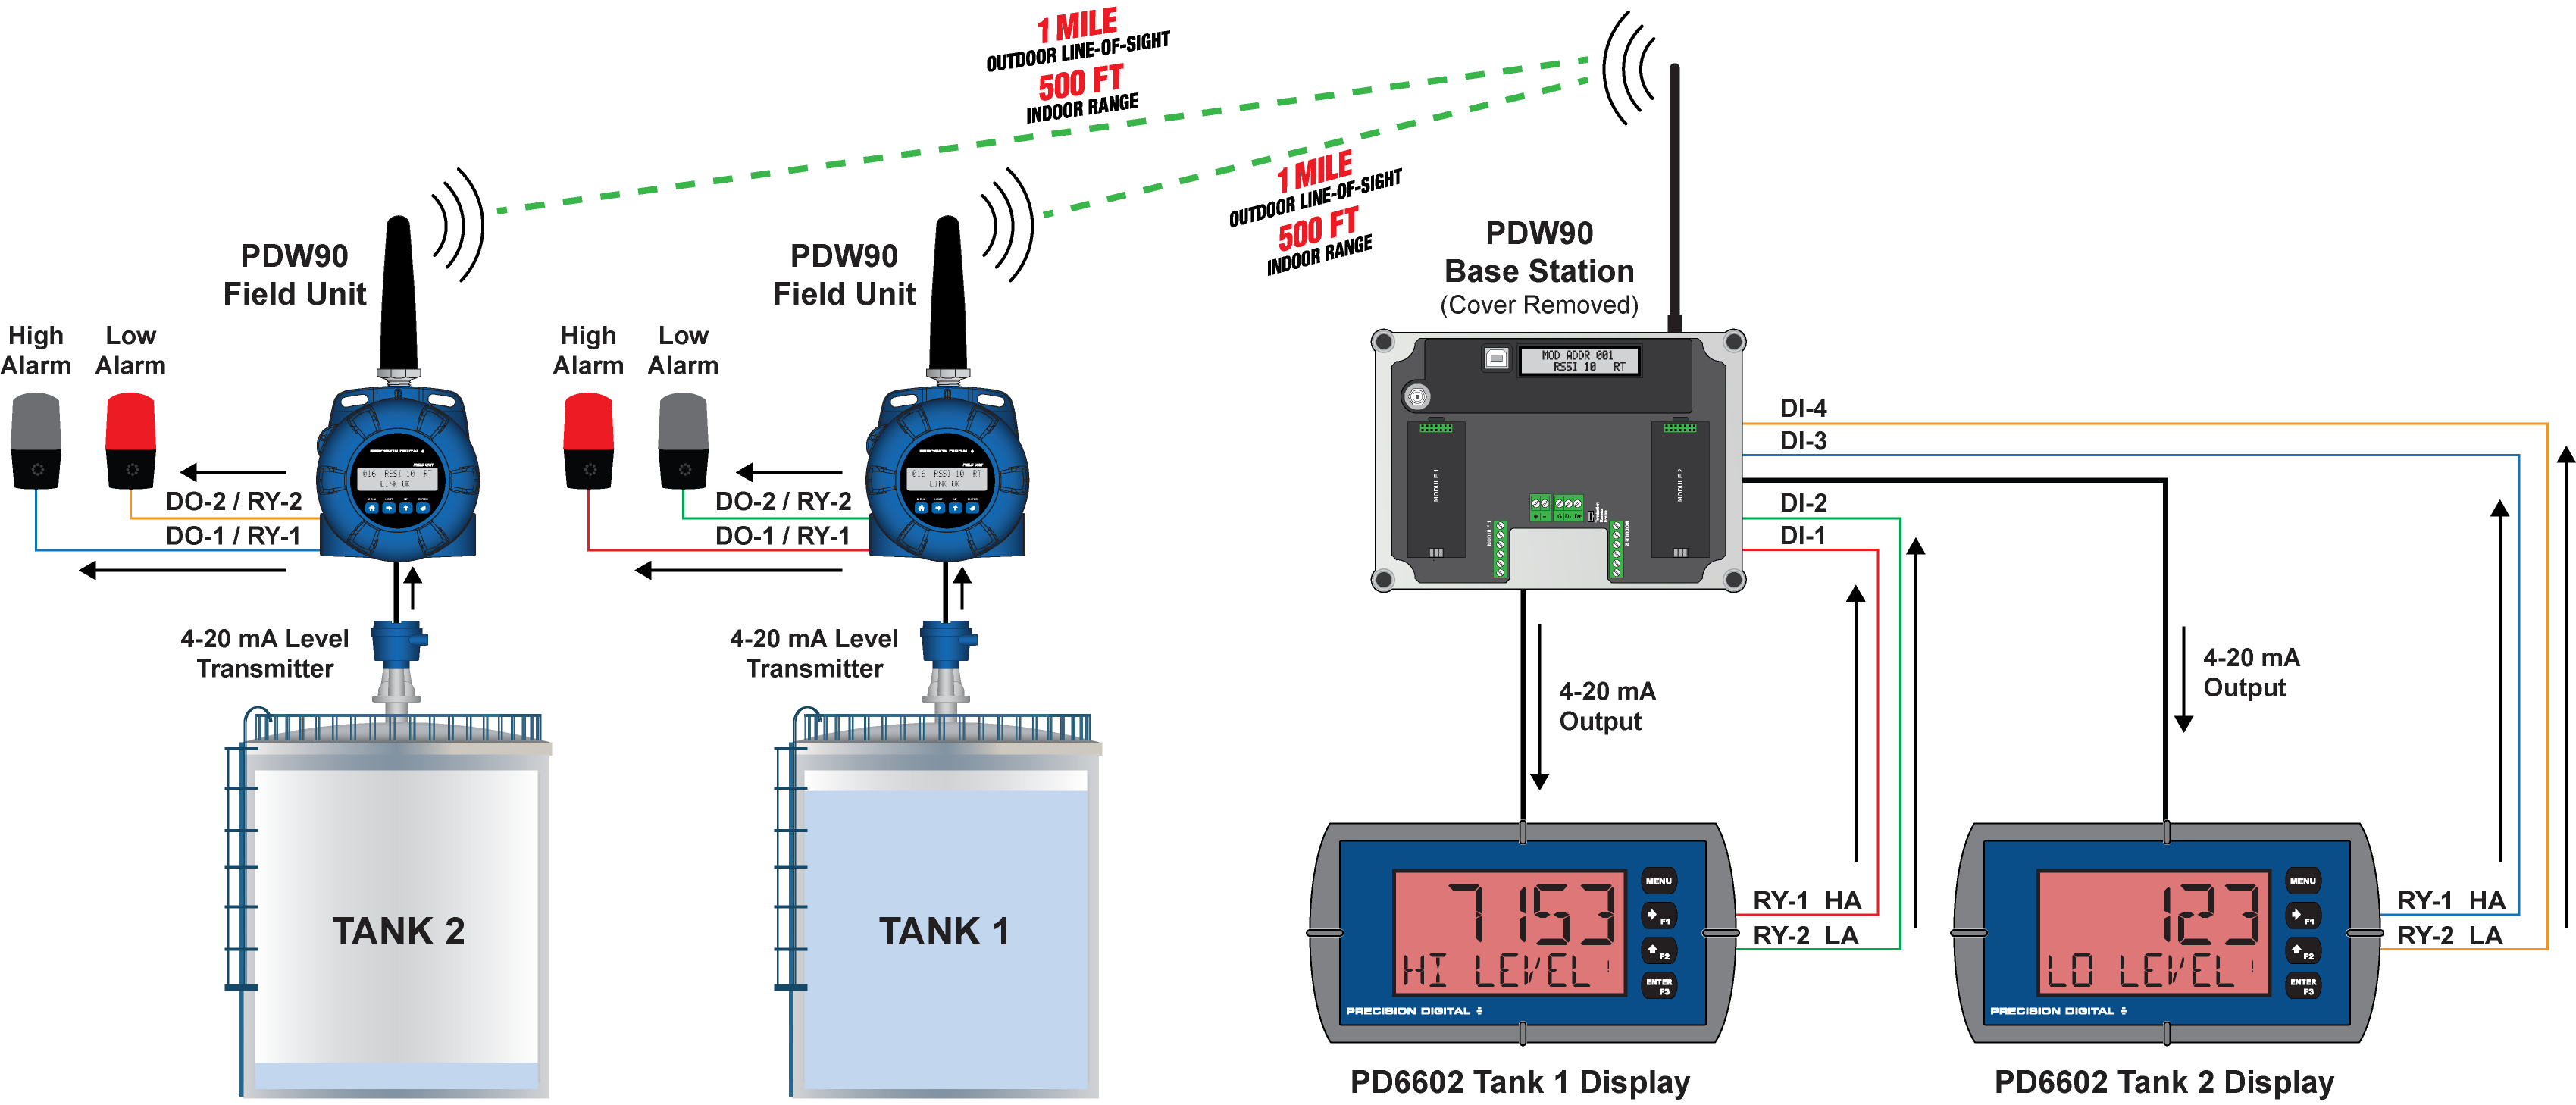 Wireless Tank Level Monitoring of Two Tanks with Field Alarms